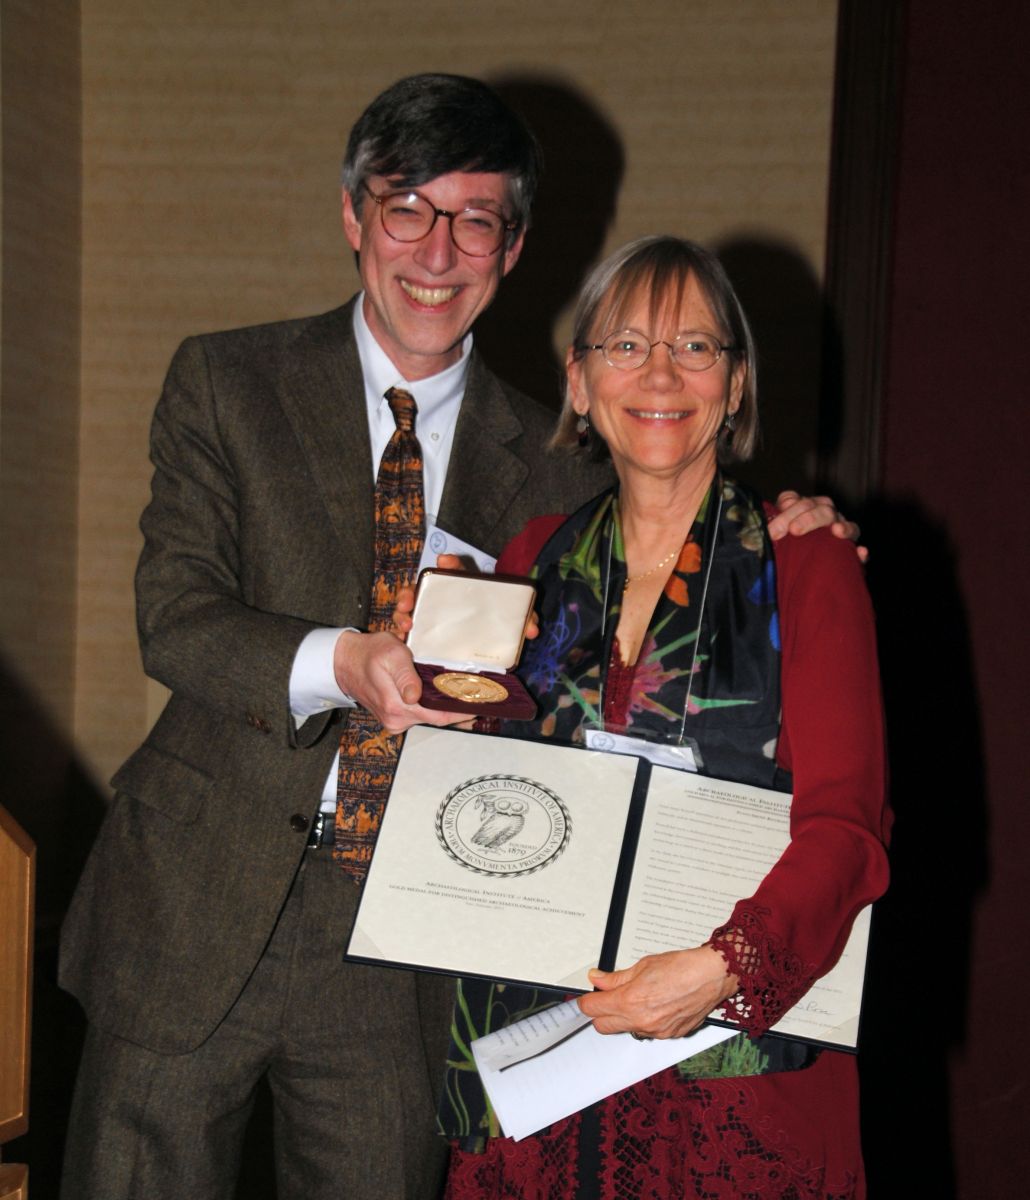 Brian Rose presents Susan Rotroff with the Gold Medal Award